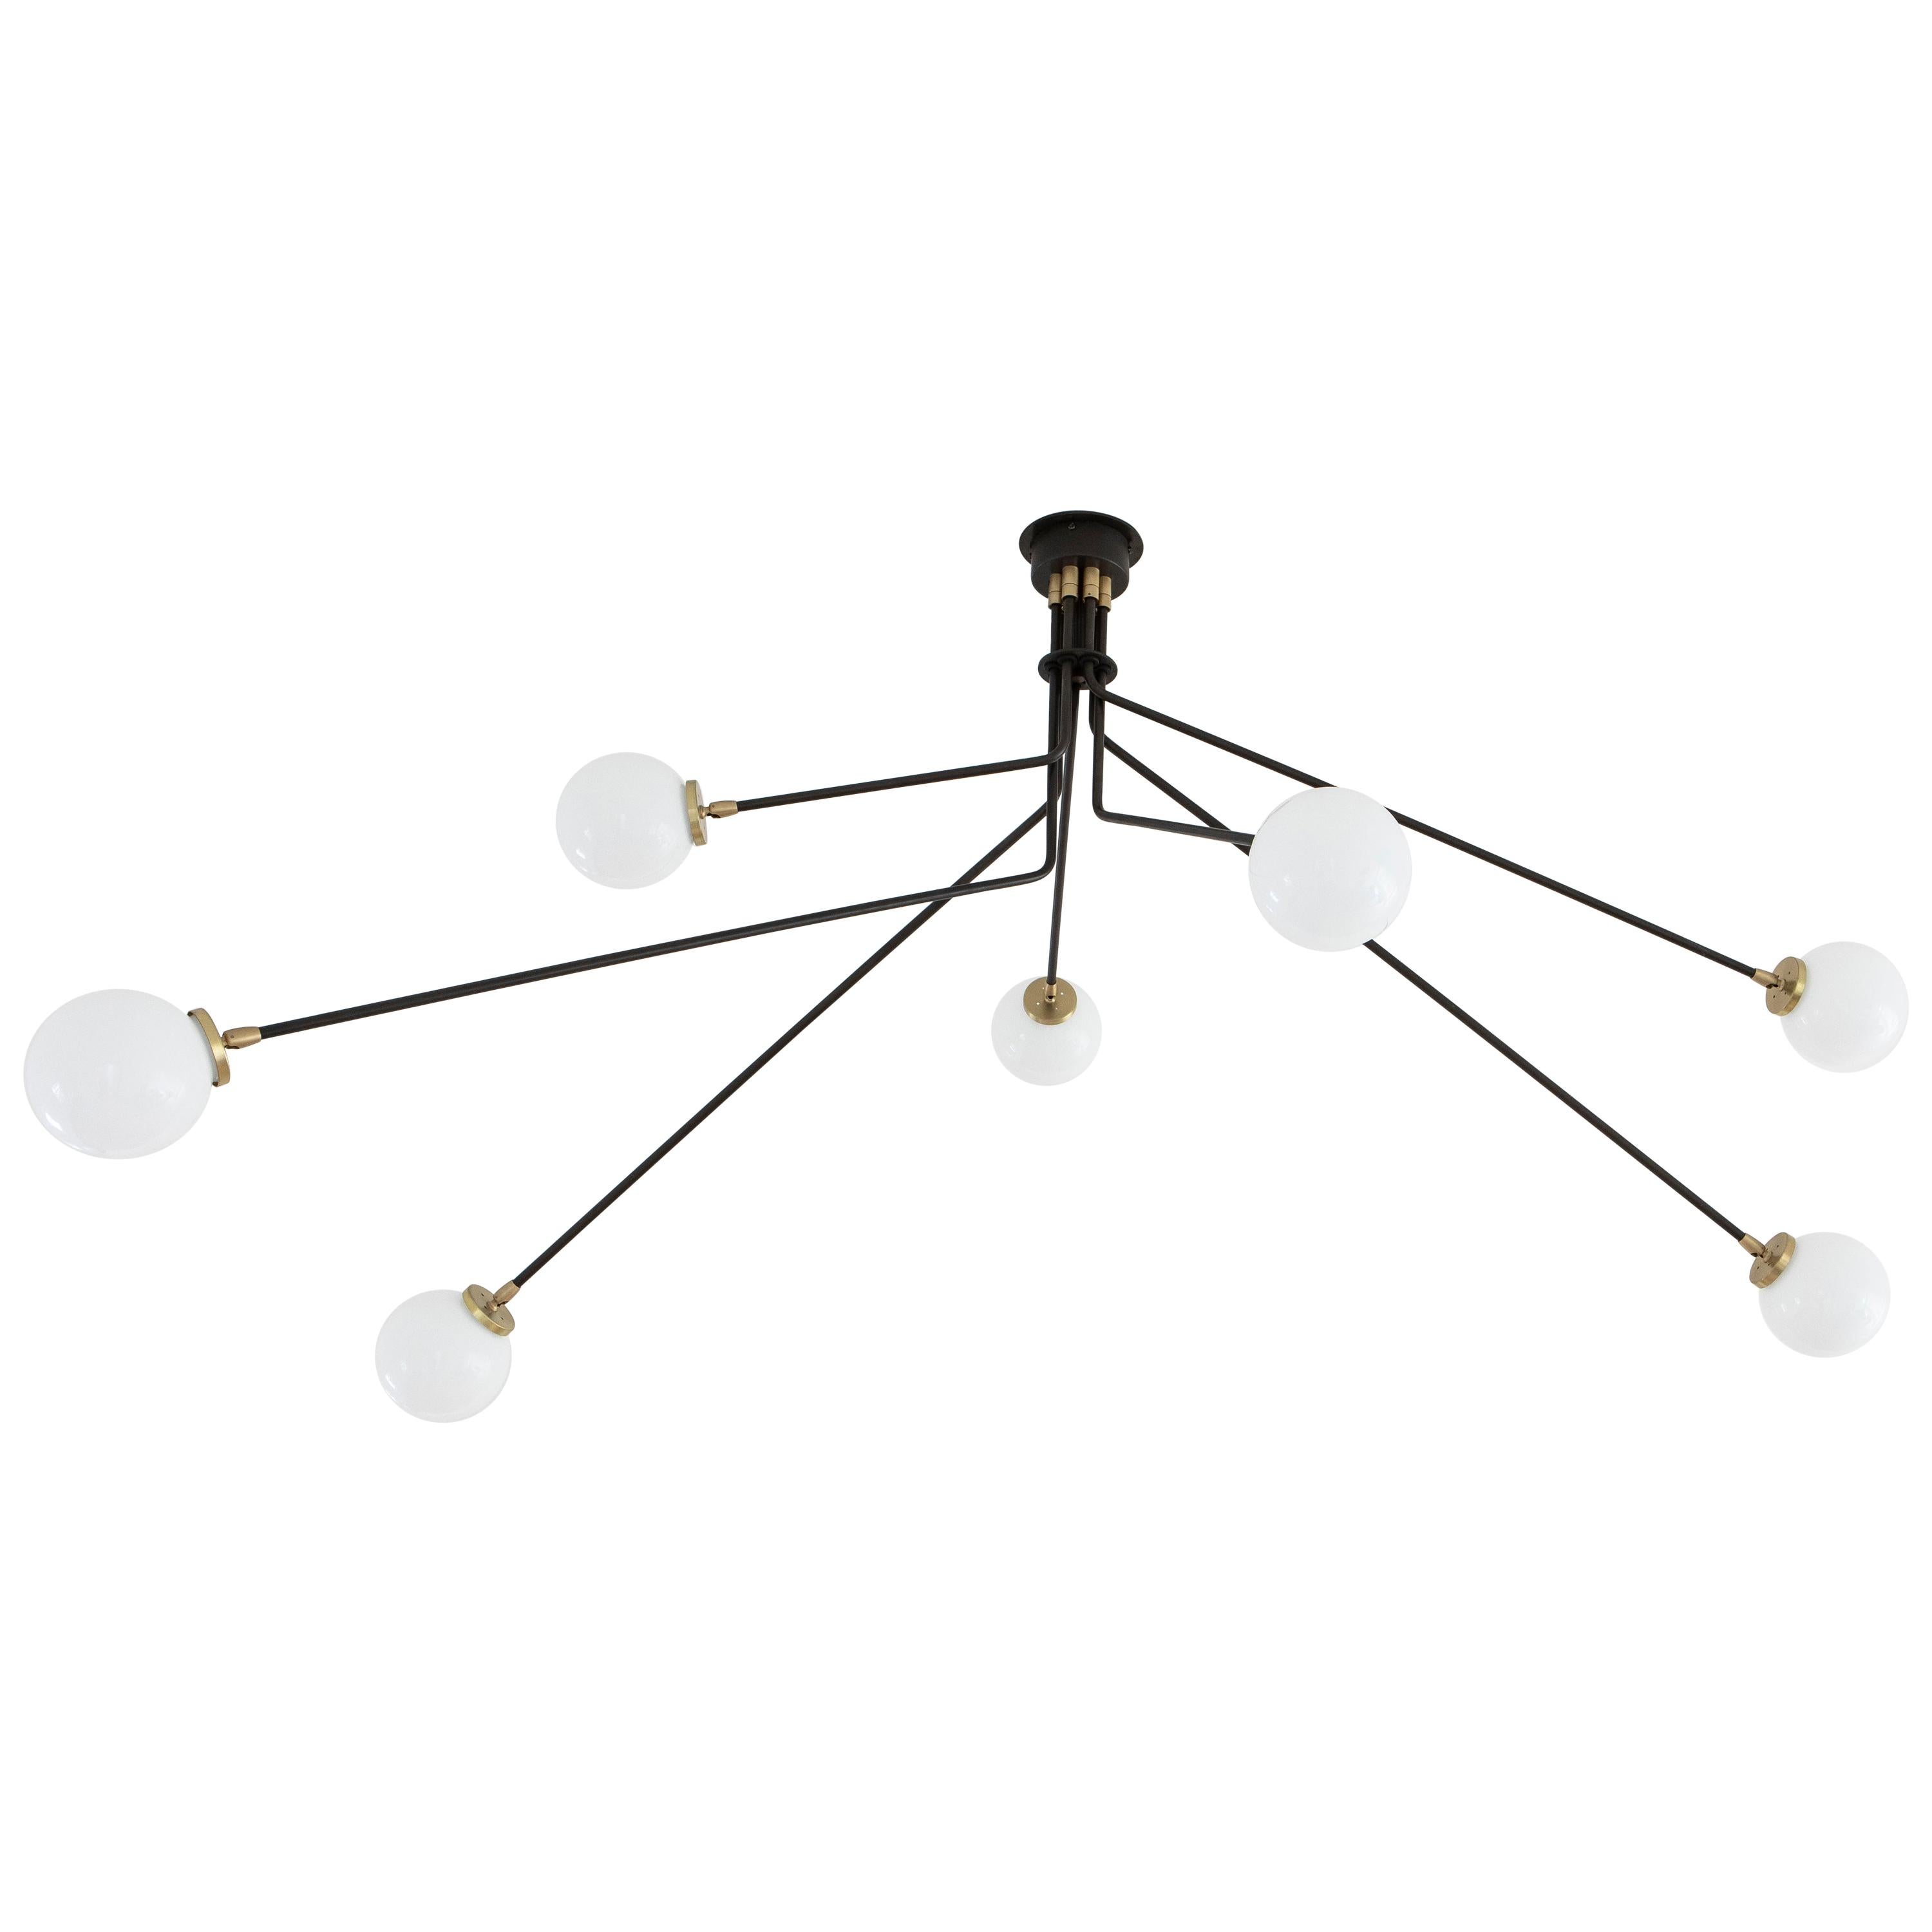 Array Pendant Ceiling Fixture in Bronze with Opal Glass Shades